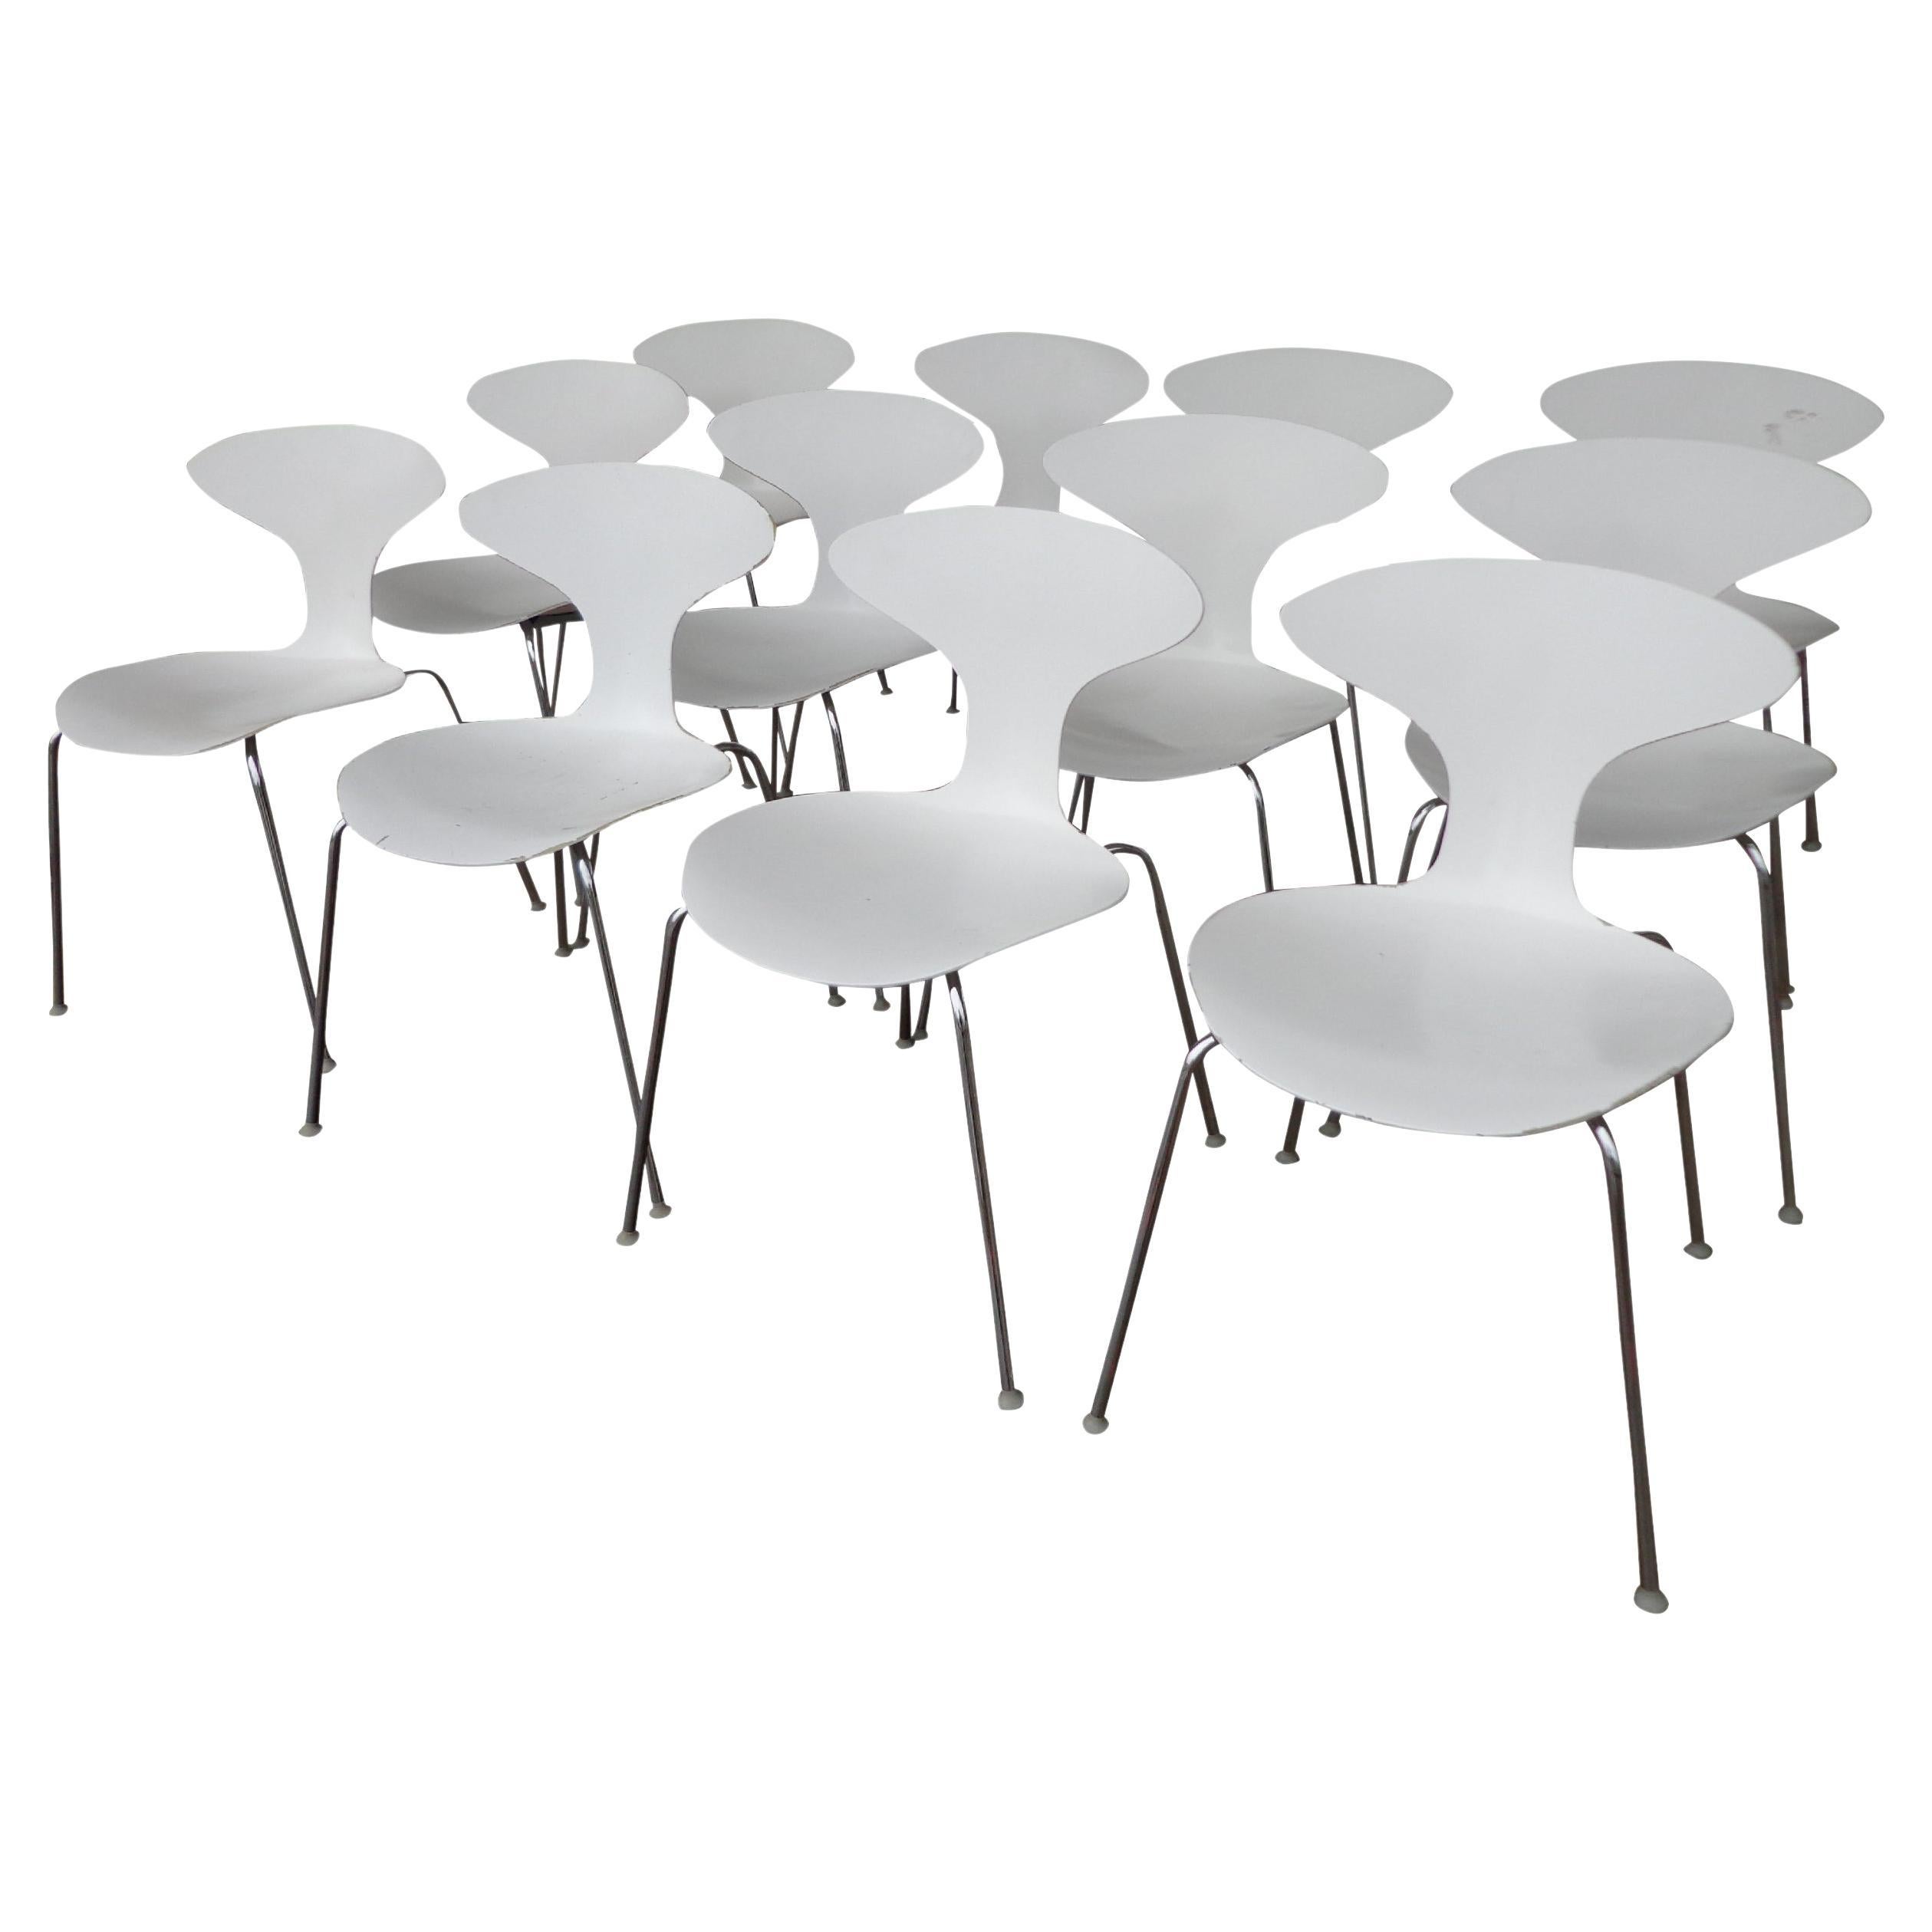 Set of 12 Bernhardt orbit side chairs by Russ Lovegrove

Building upon classic designs by Charles Eames, Arne Jacobsen and Norman Cherner, Ross Lovegrove created the sensual, organic and sculptural Orbit stacking chair that can be dressed up with